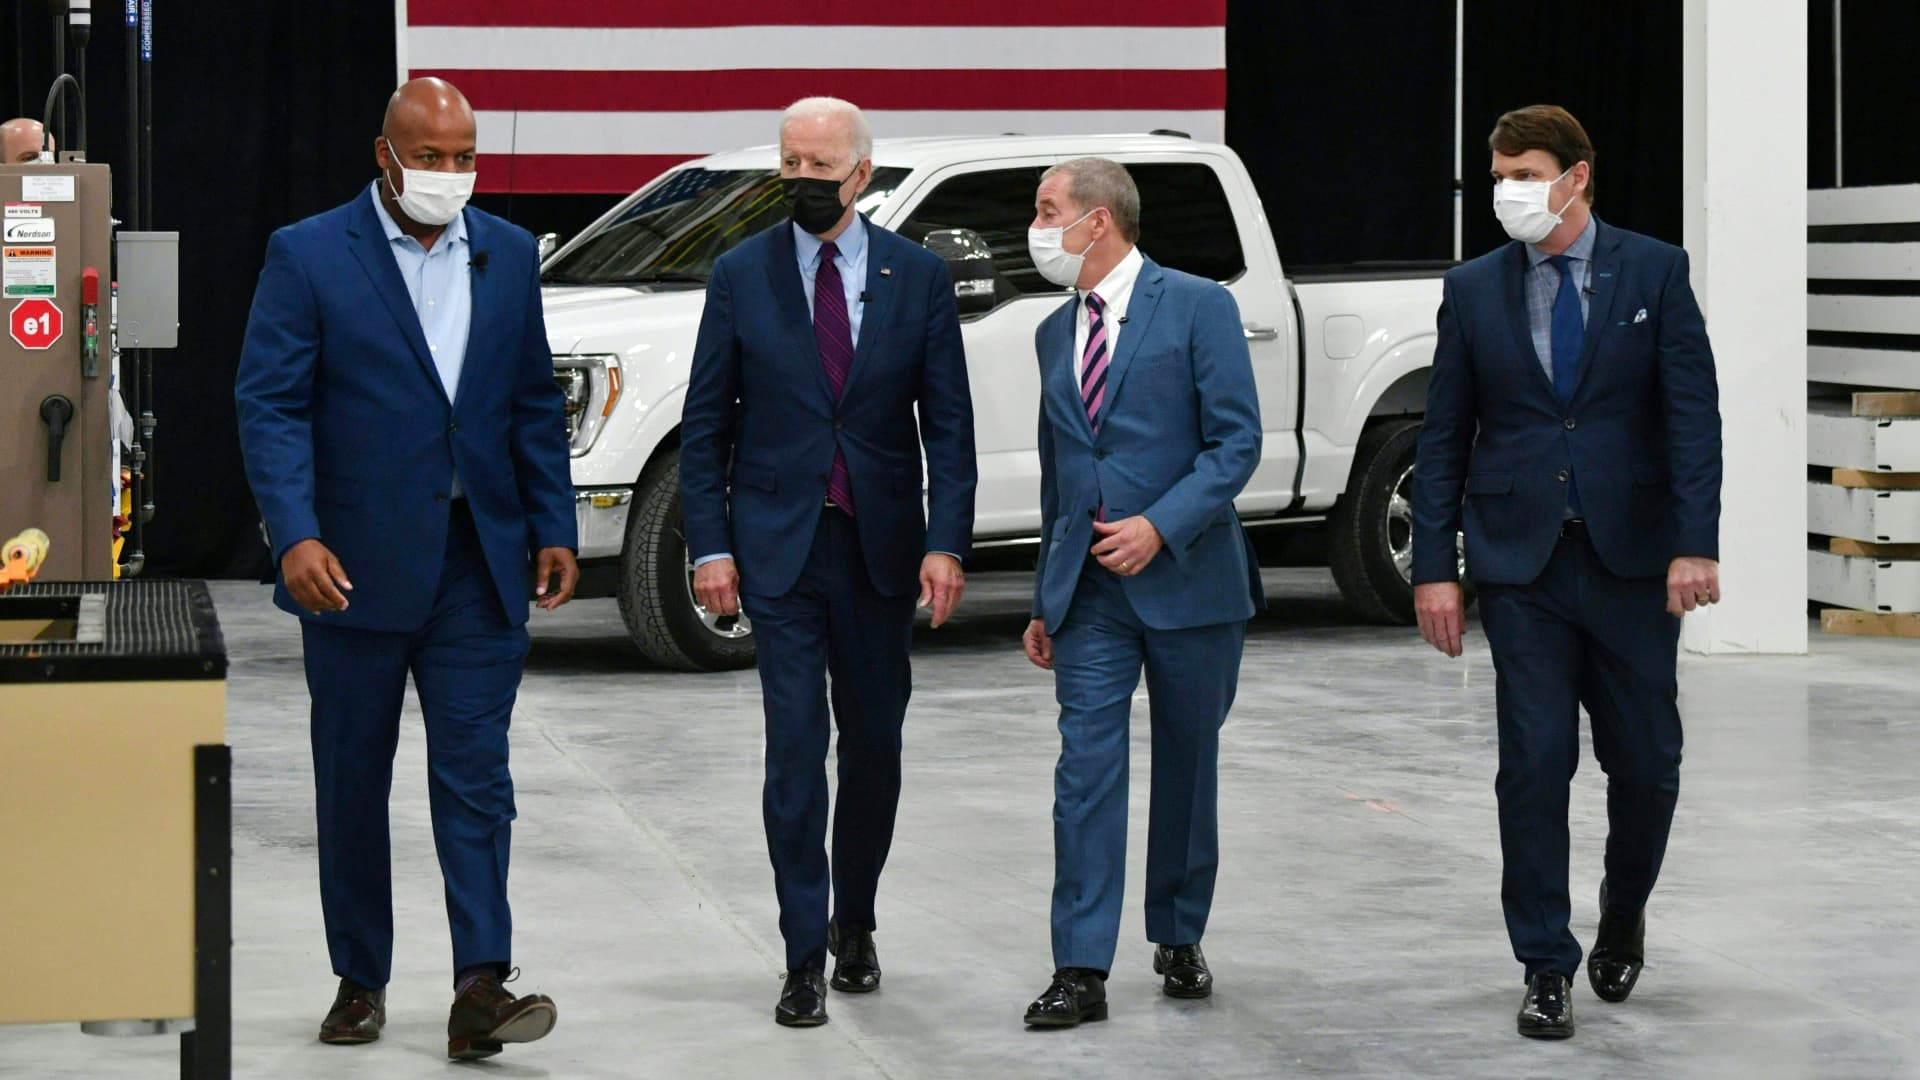 President Joe Biden with Corey Williams (L), plant Manager, William Ford, Jr. (2-R), Executive Chairman of Ford Motor Company and Jim Farley (R), CEO of Ford Motor Company, tours of the Ford Rouge Electric Vehicle Center, in Dearborn, Michigan on May 18, 2021.